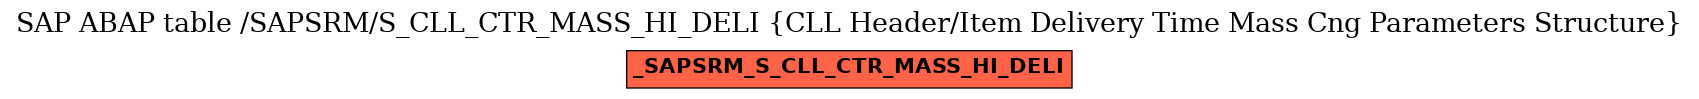 E-R Diagram for table /SAPSRM/S_CLL_CTR_MASS_HI_DELI (CLL Header/Item Delivery Time Mass Cng Parameters Structure)